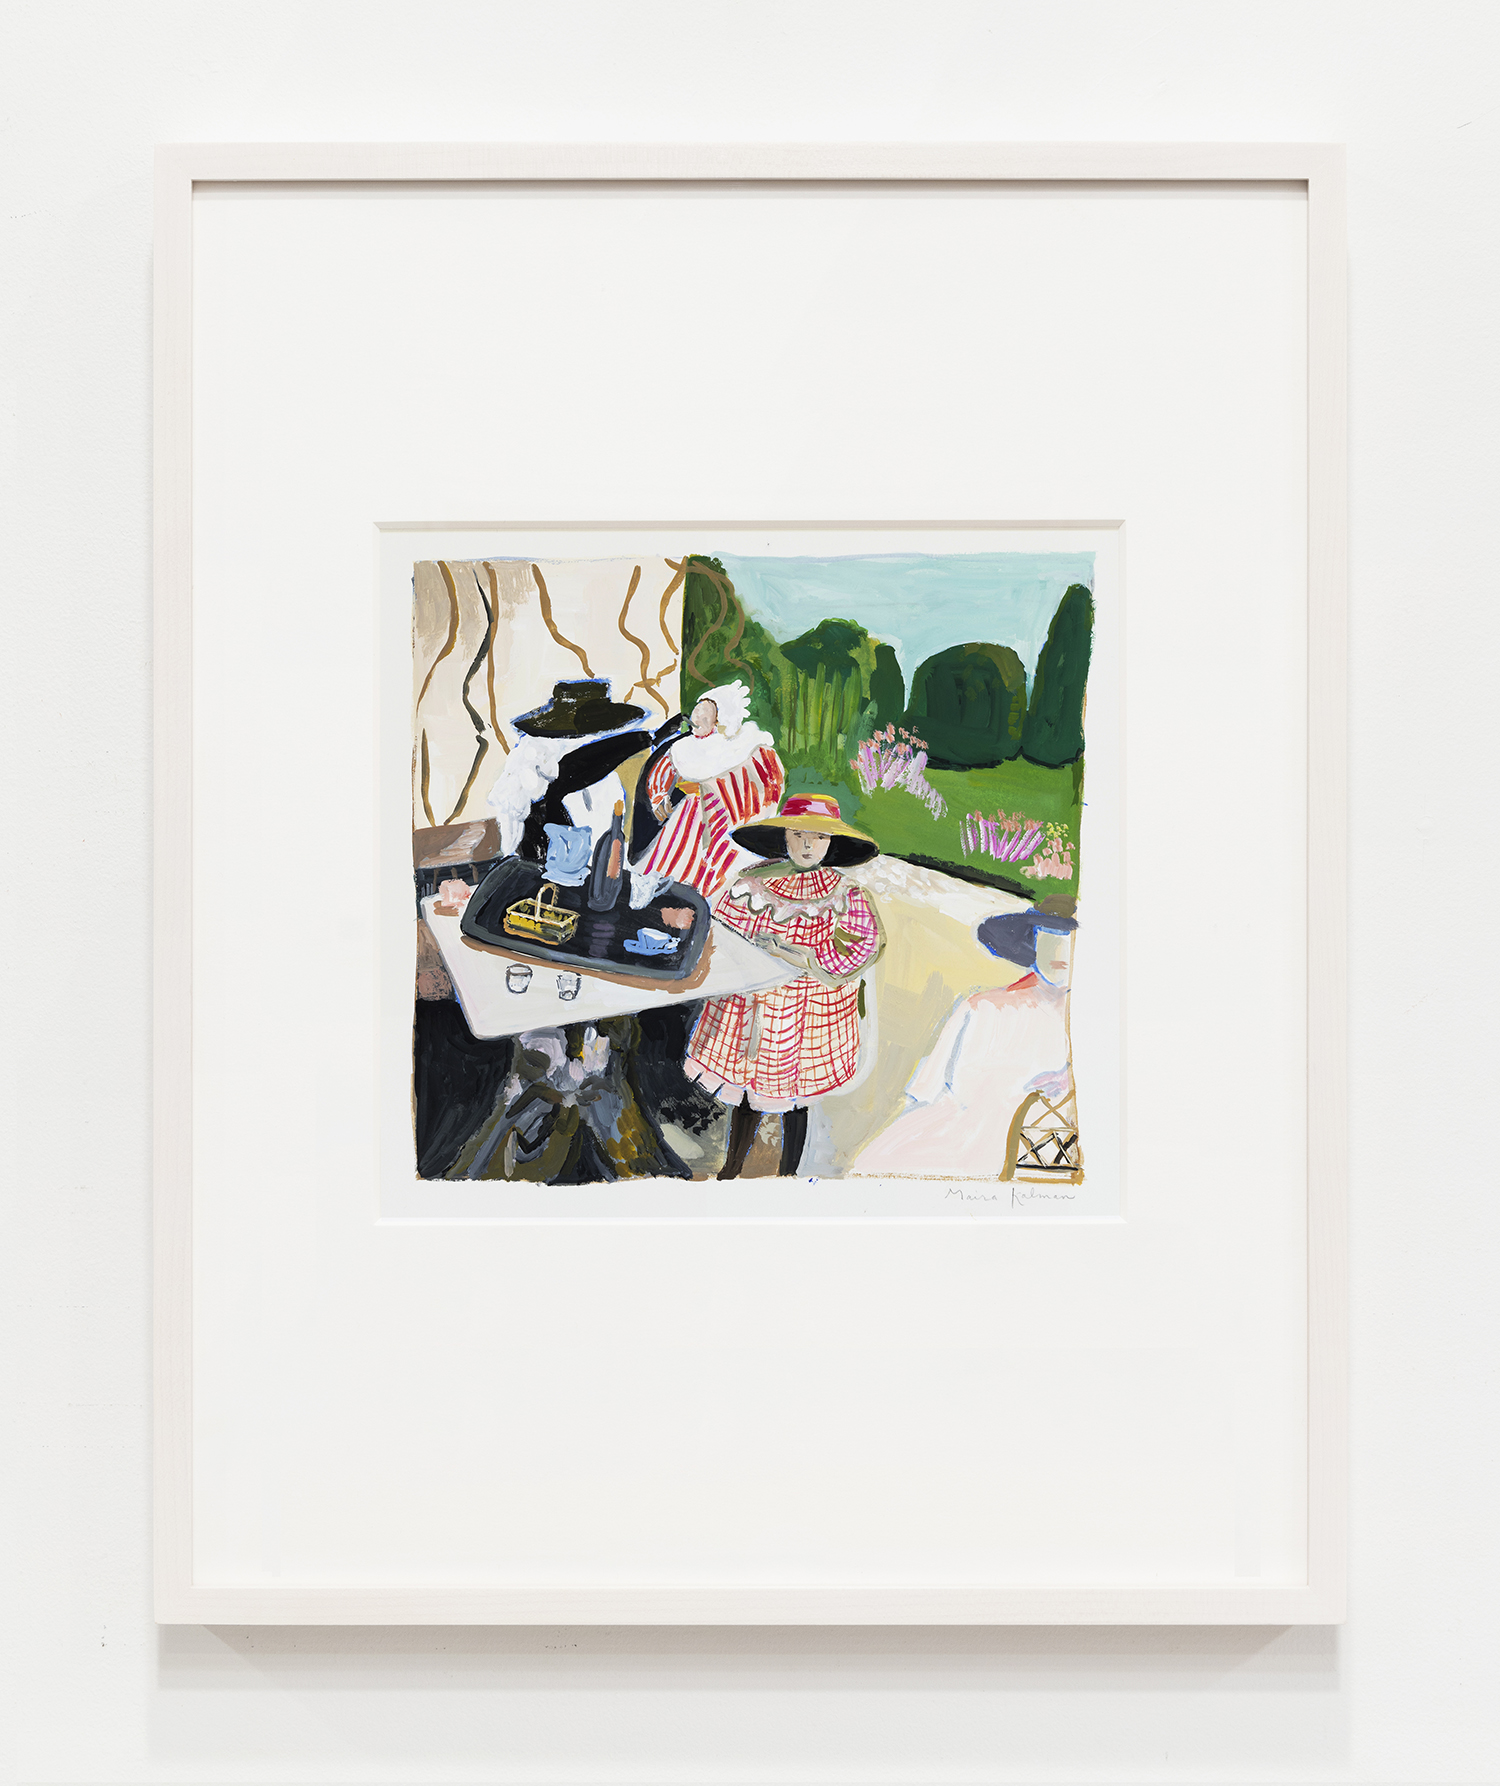 Maira Kalman Woman Holding Baby, 2021 Gouache Image Dimensions: 8 1/2 x 9 1/8 inches (21.6 x 23.2 cm) Framed Dimensions: 20 x 16 inches (50.8 x 40.6 cm)